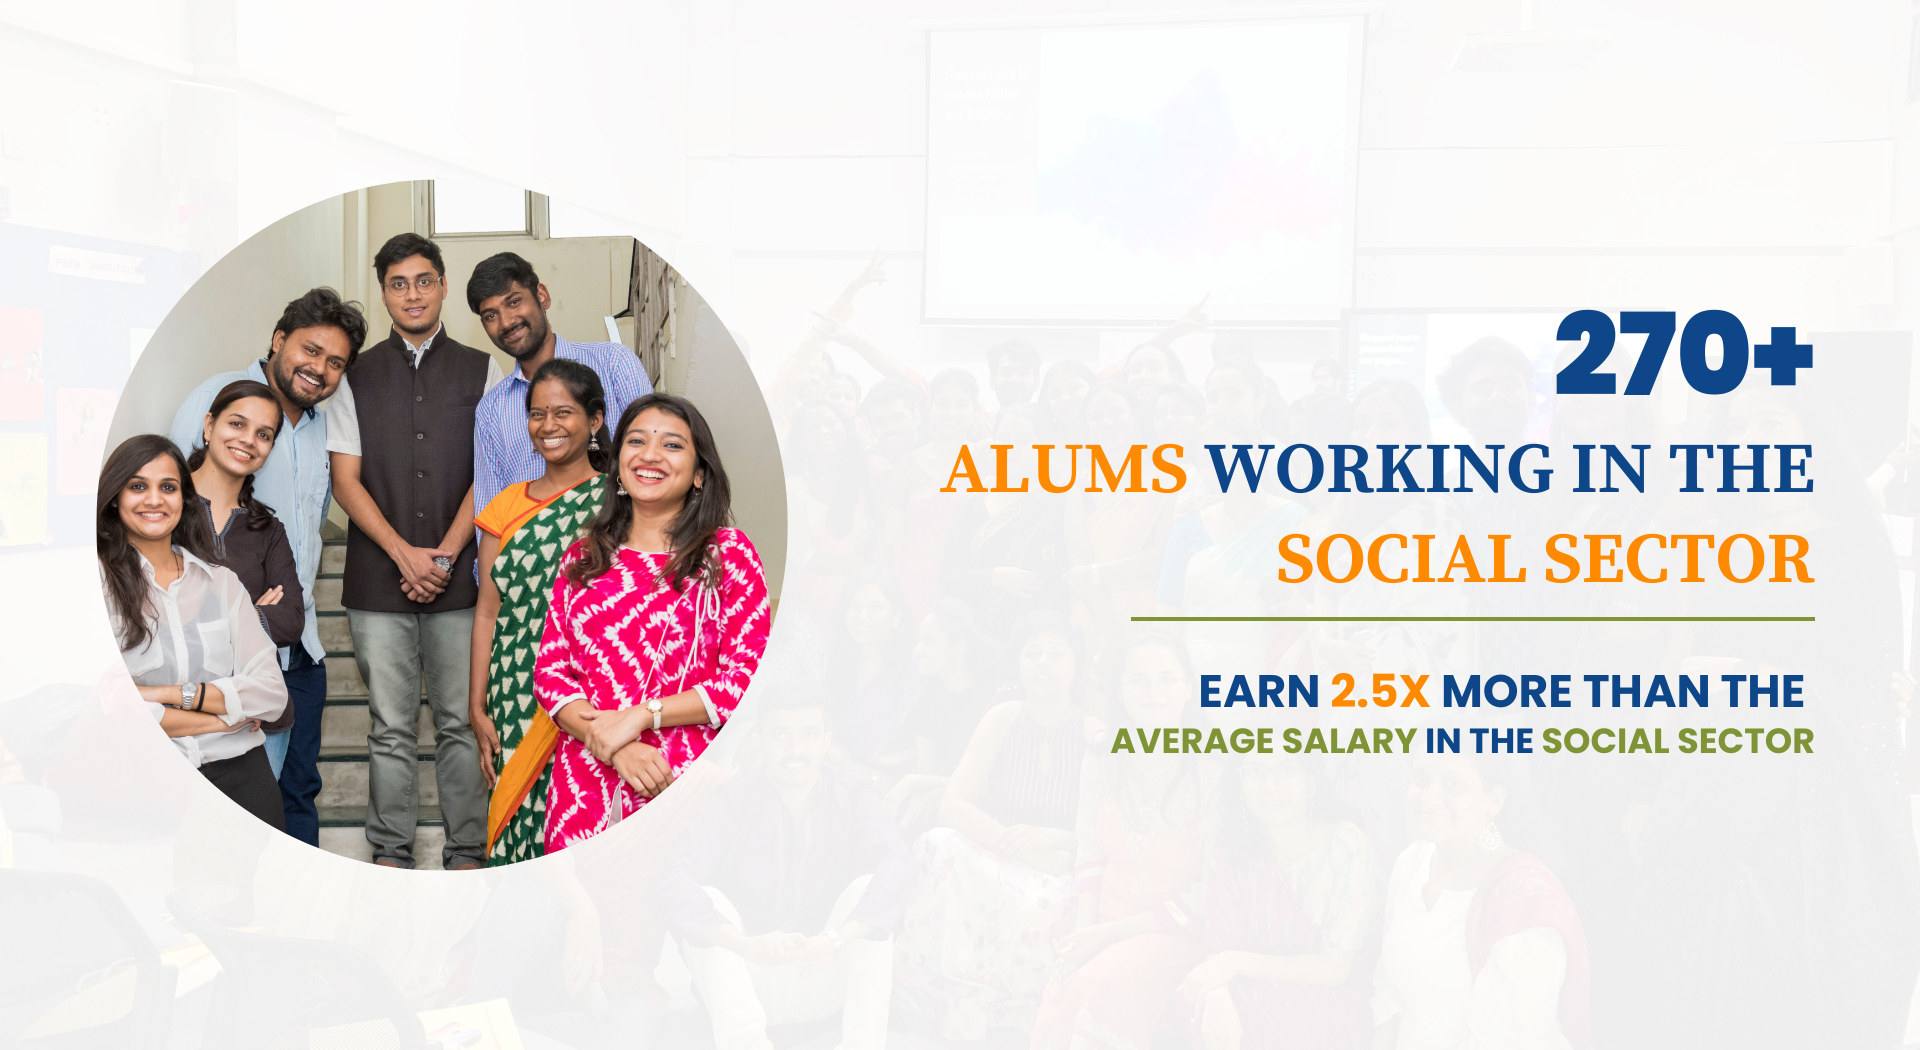 270+ ALUMS WORKING IN THE SOCIAL SECTOR